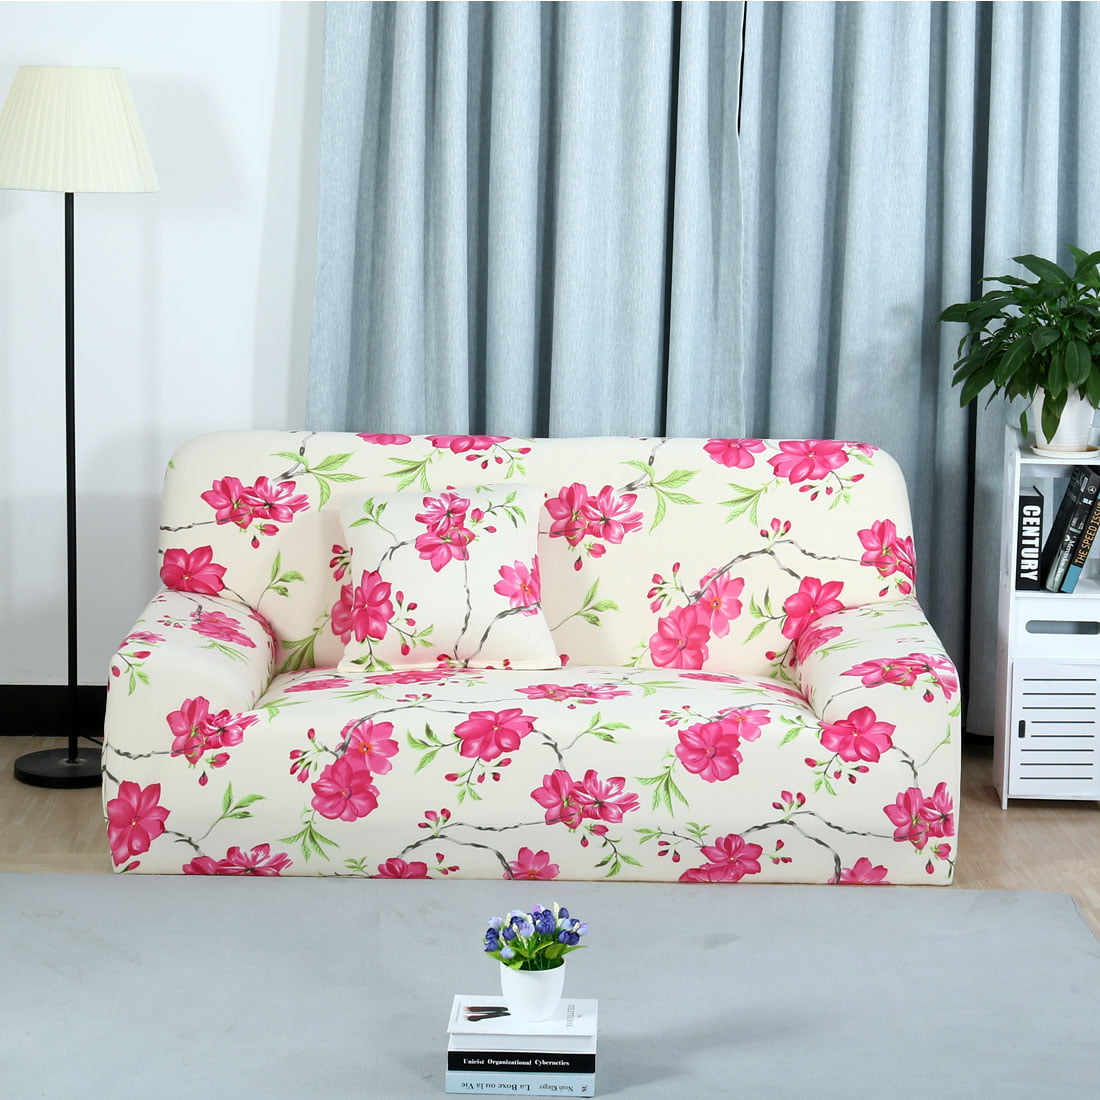 Details about   New Long Plush Sofa Covers Protector Warm Thicken Couch Cover  Room Slipcover 